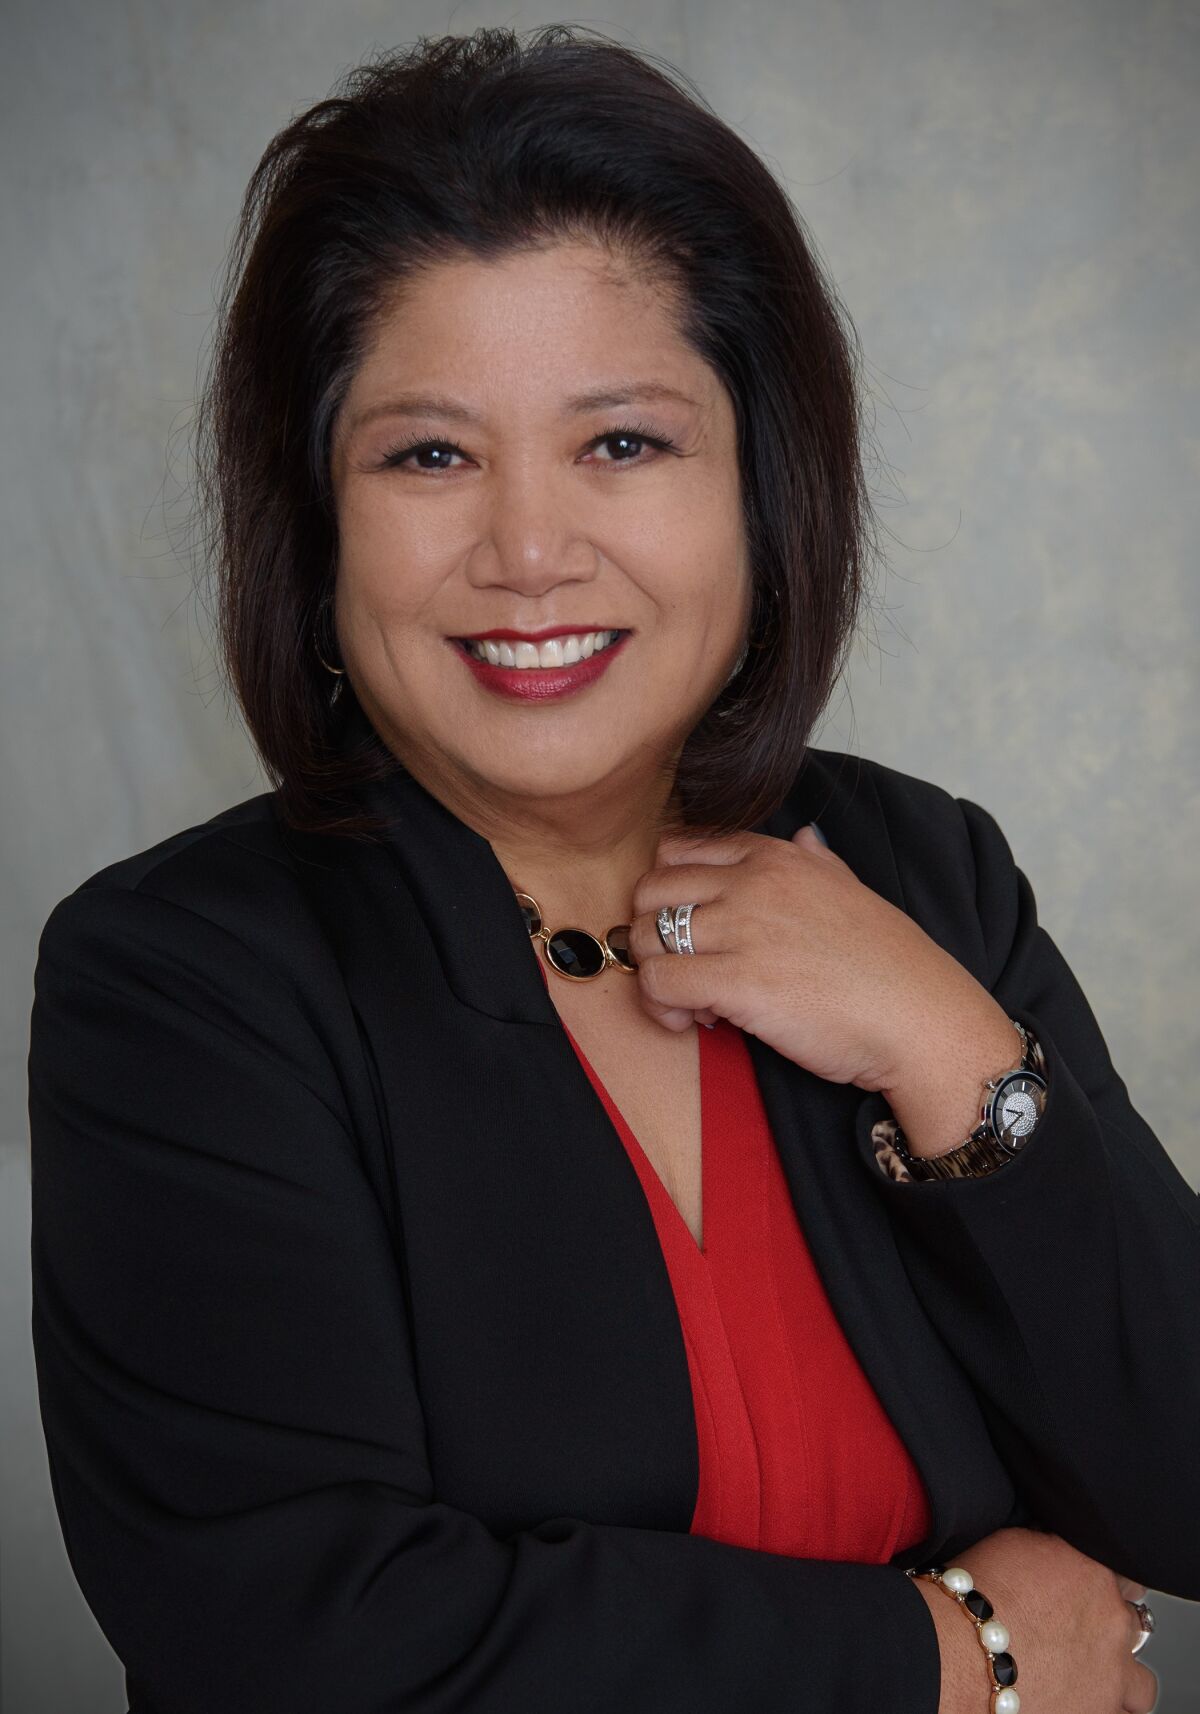 Diane "Dee" Navarro has been named vice president of operations at Westmont Living, a La Jolla-based senior living provider.